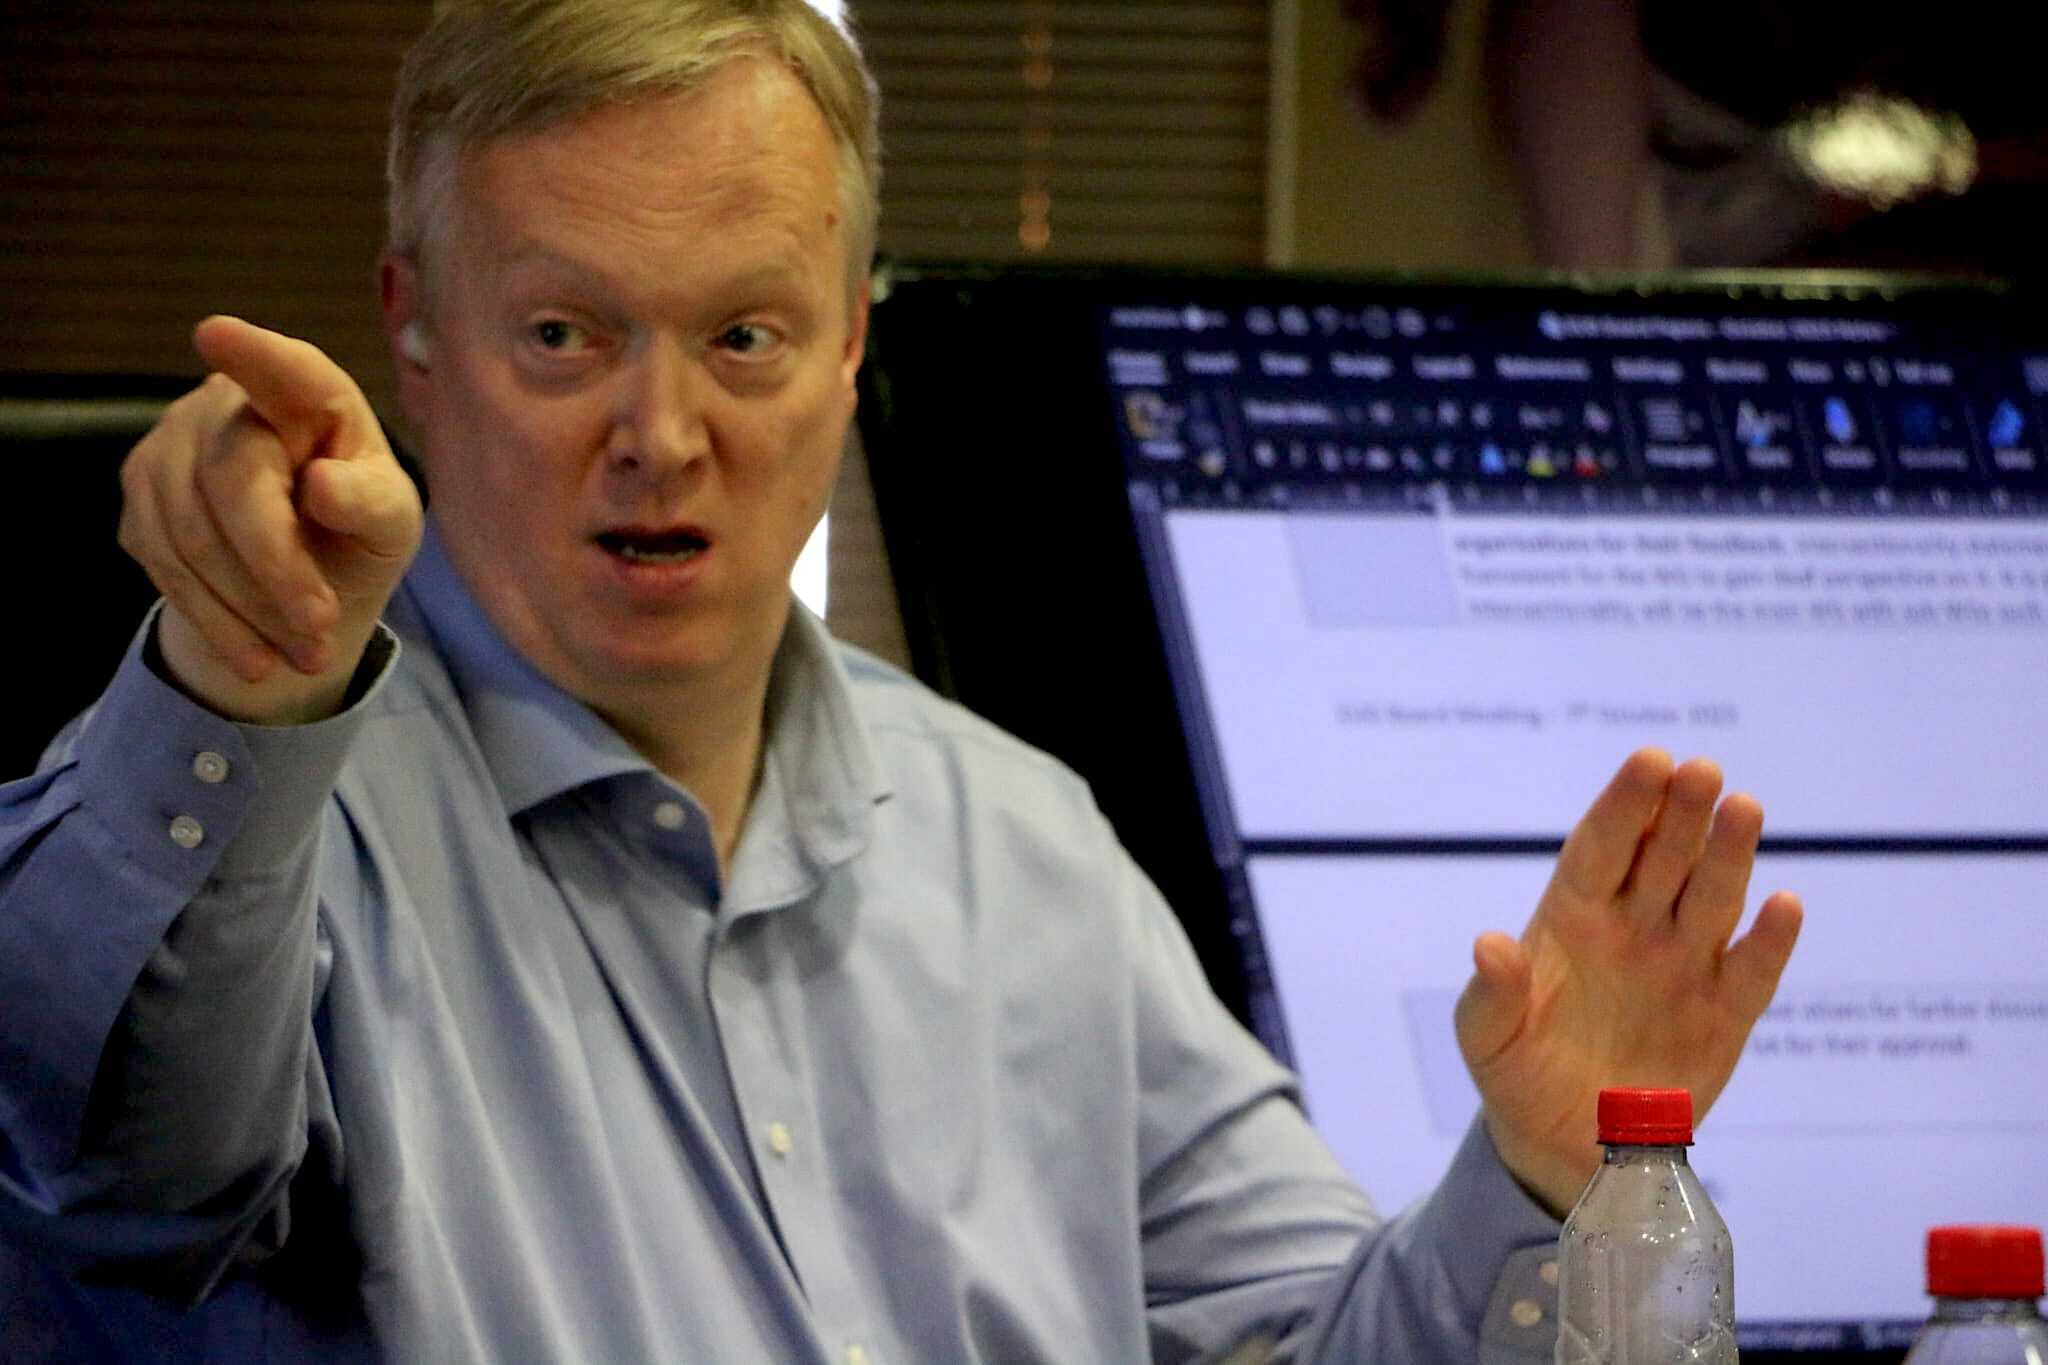 A man in a blue shirt pointing and speaking in a meeting room with two water bottles on the table and a computer screen displaying notes in the background.